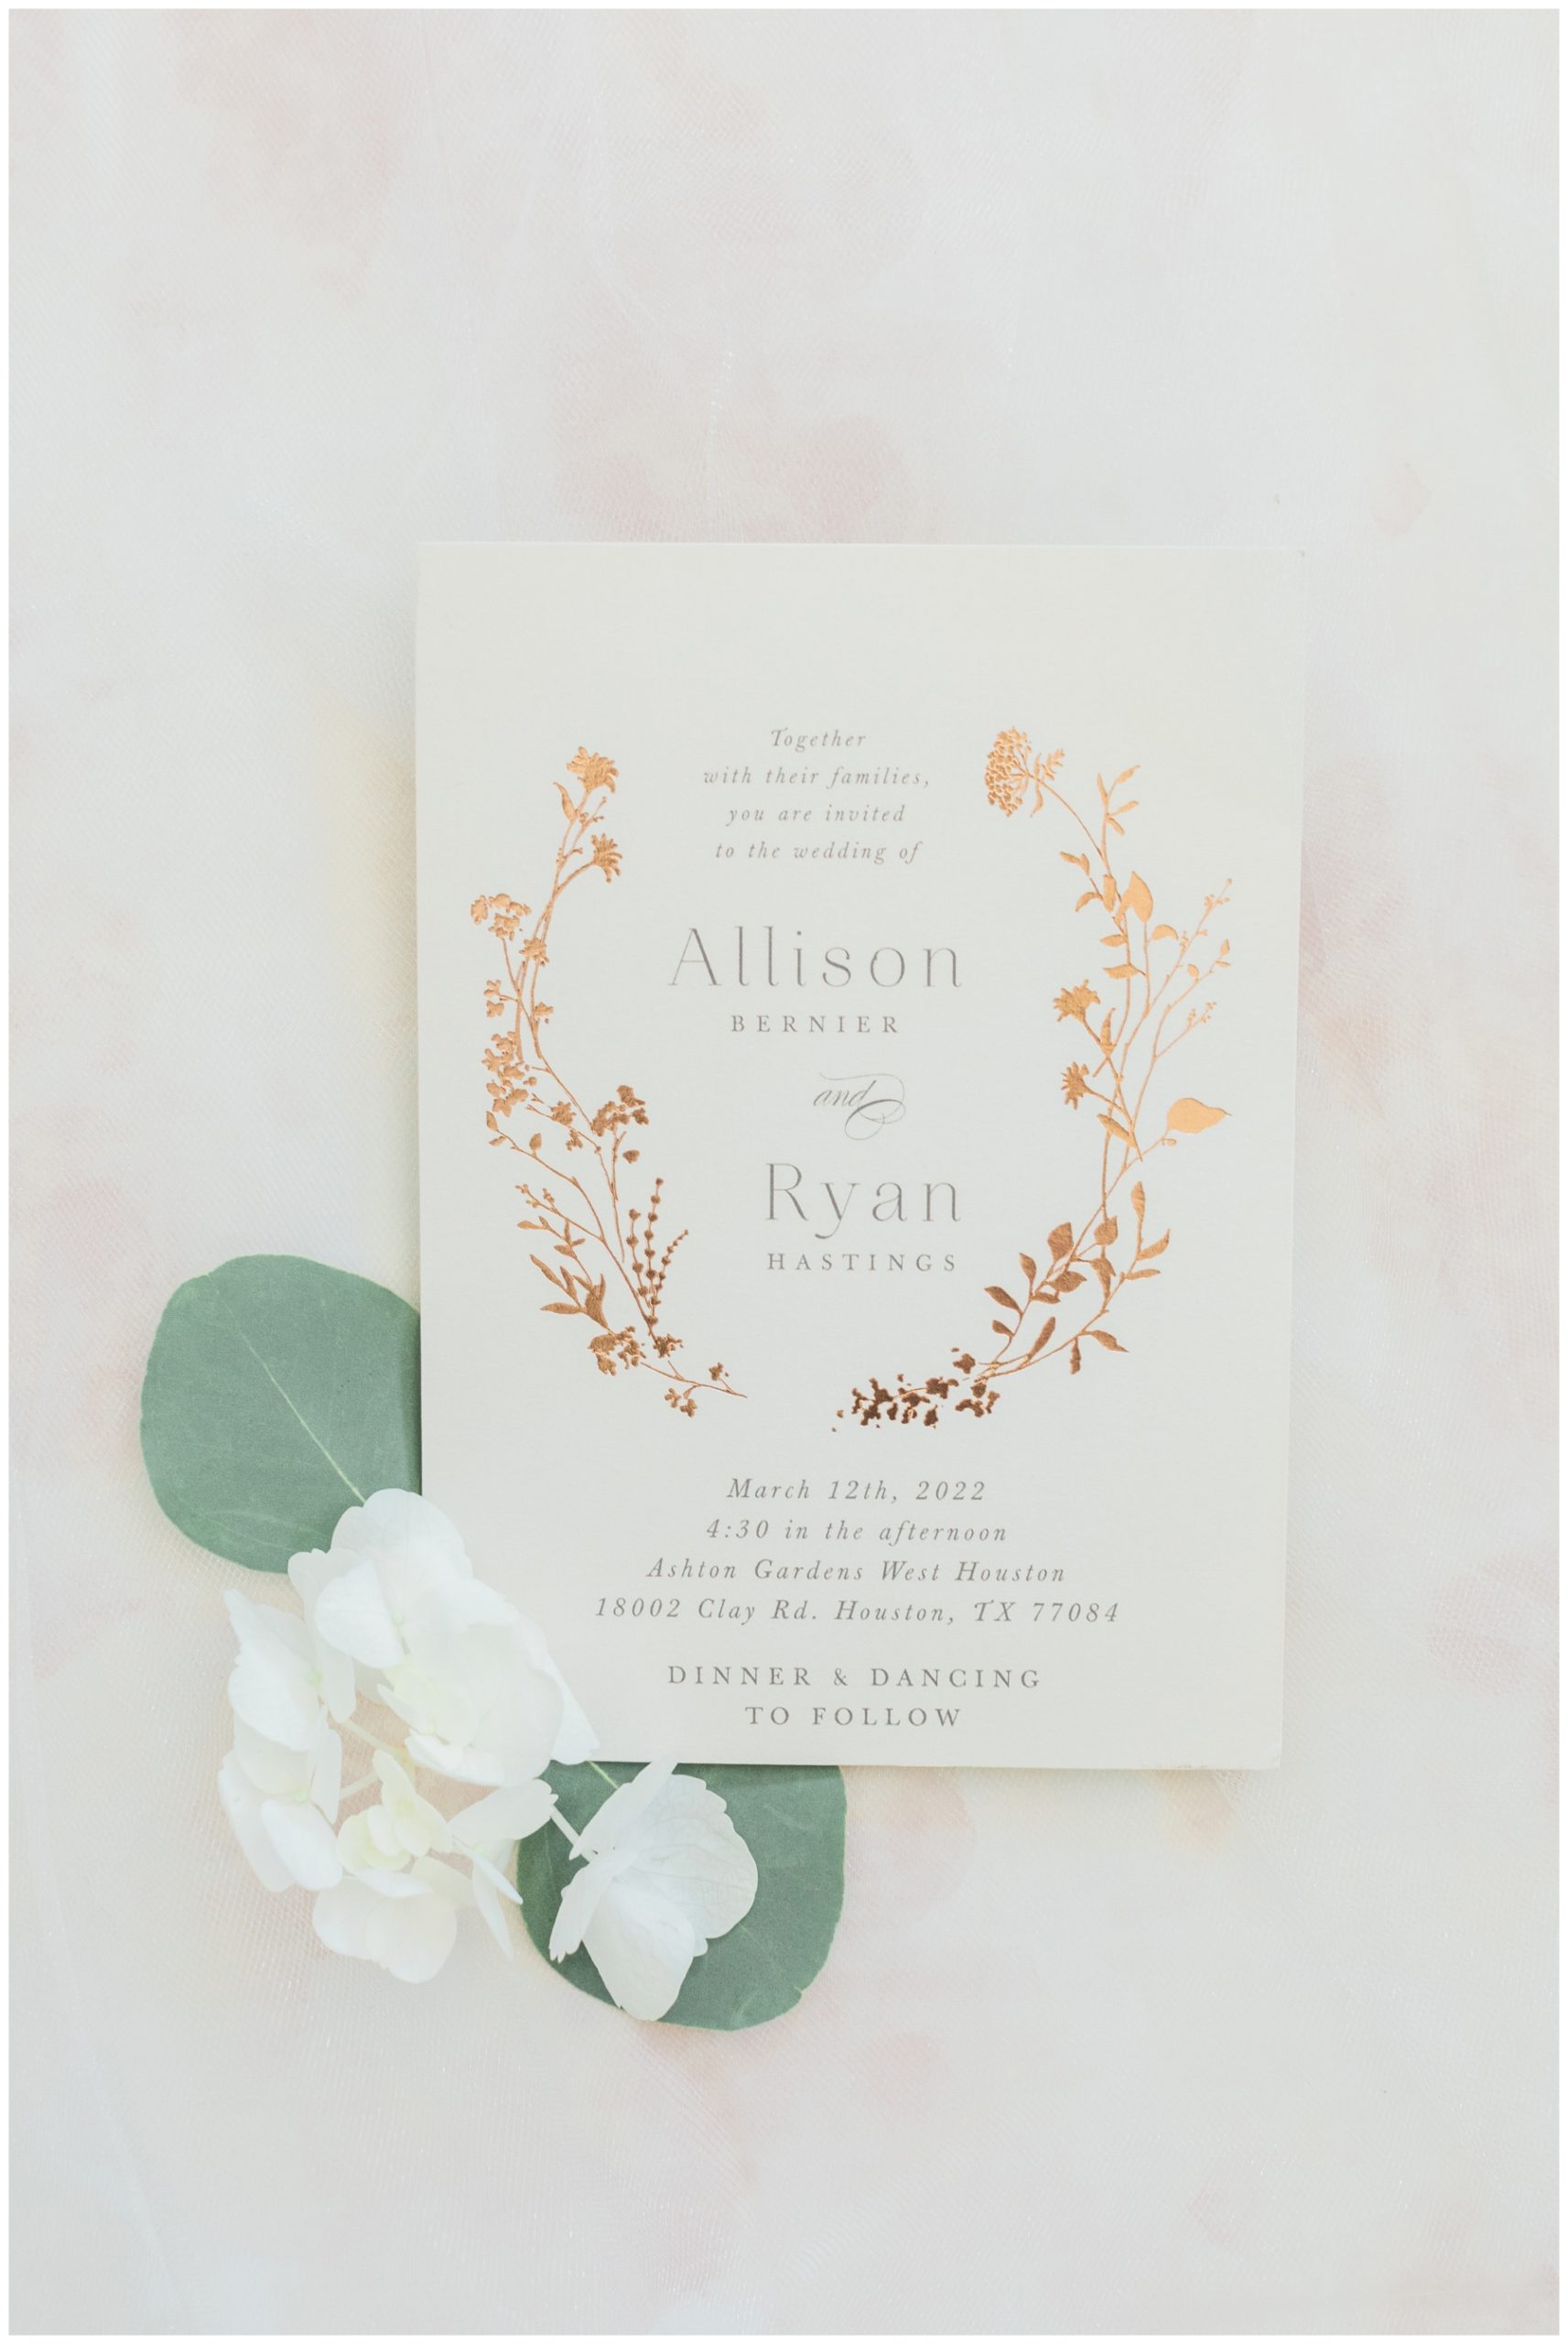 White and gold stationery for a wedding at Ashton Gardens West